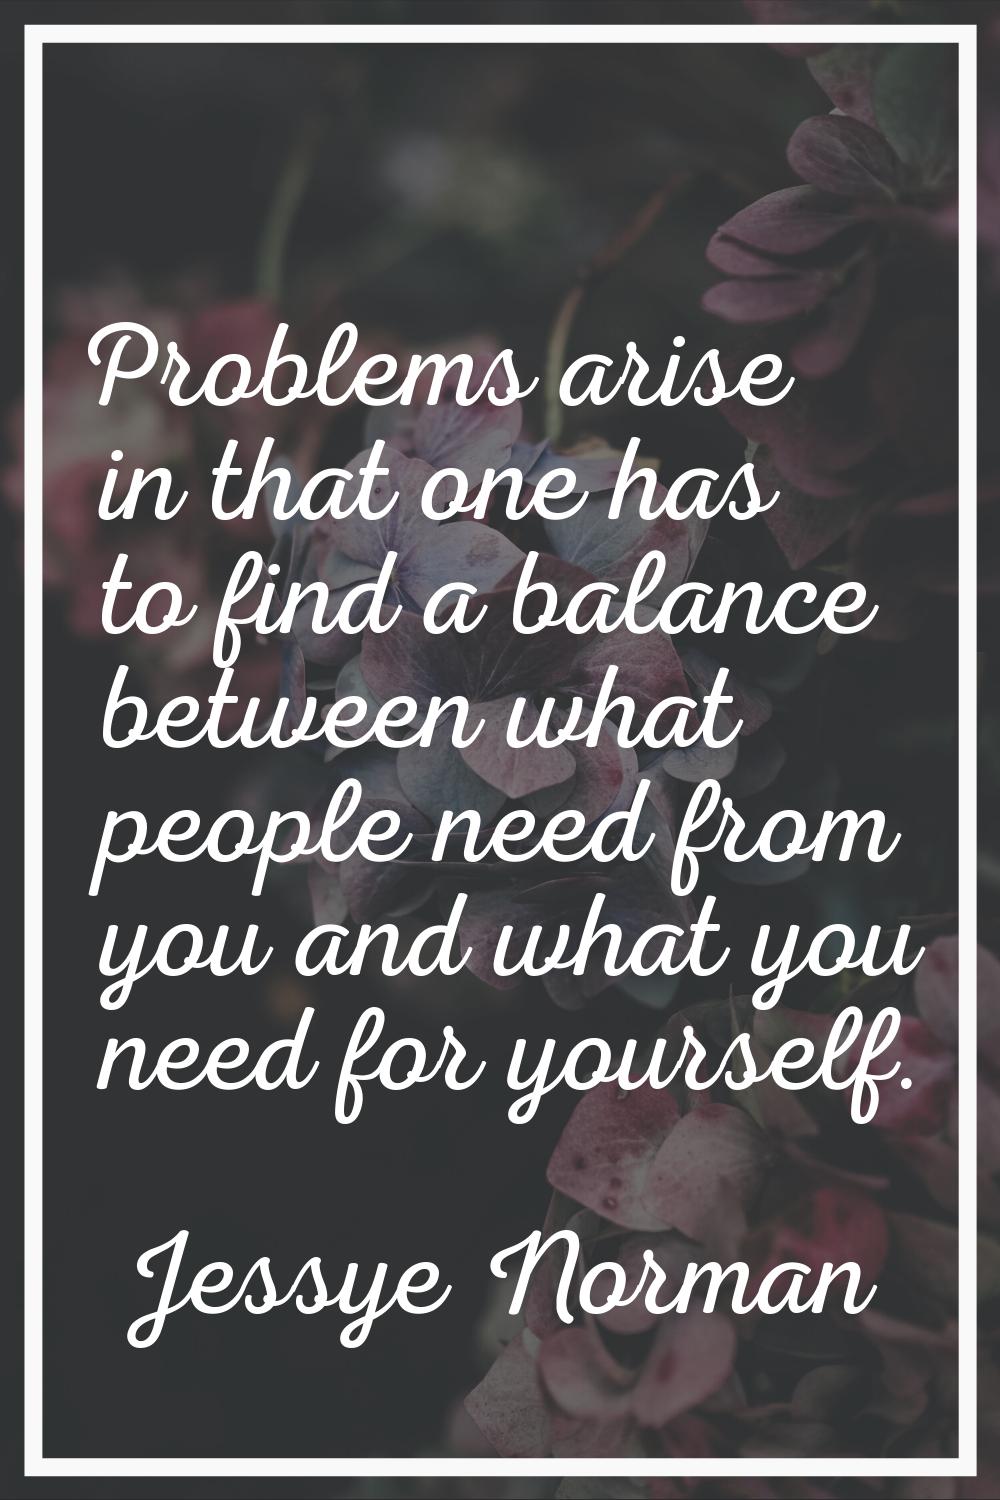 Problems arise in that one has to find a balance between what people need from you and what you nee